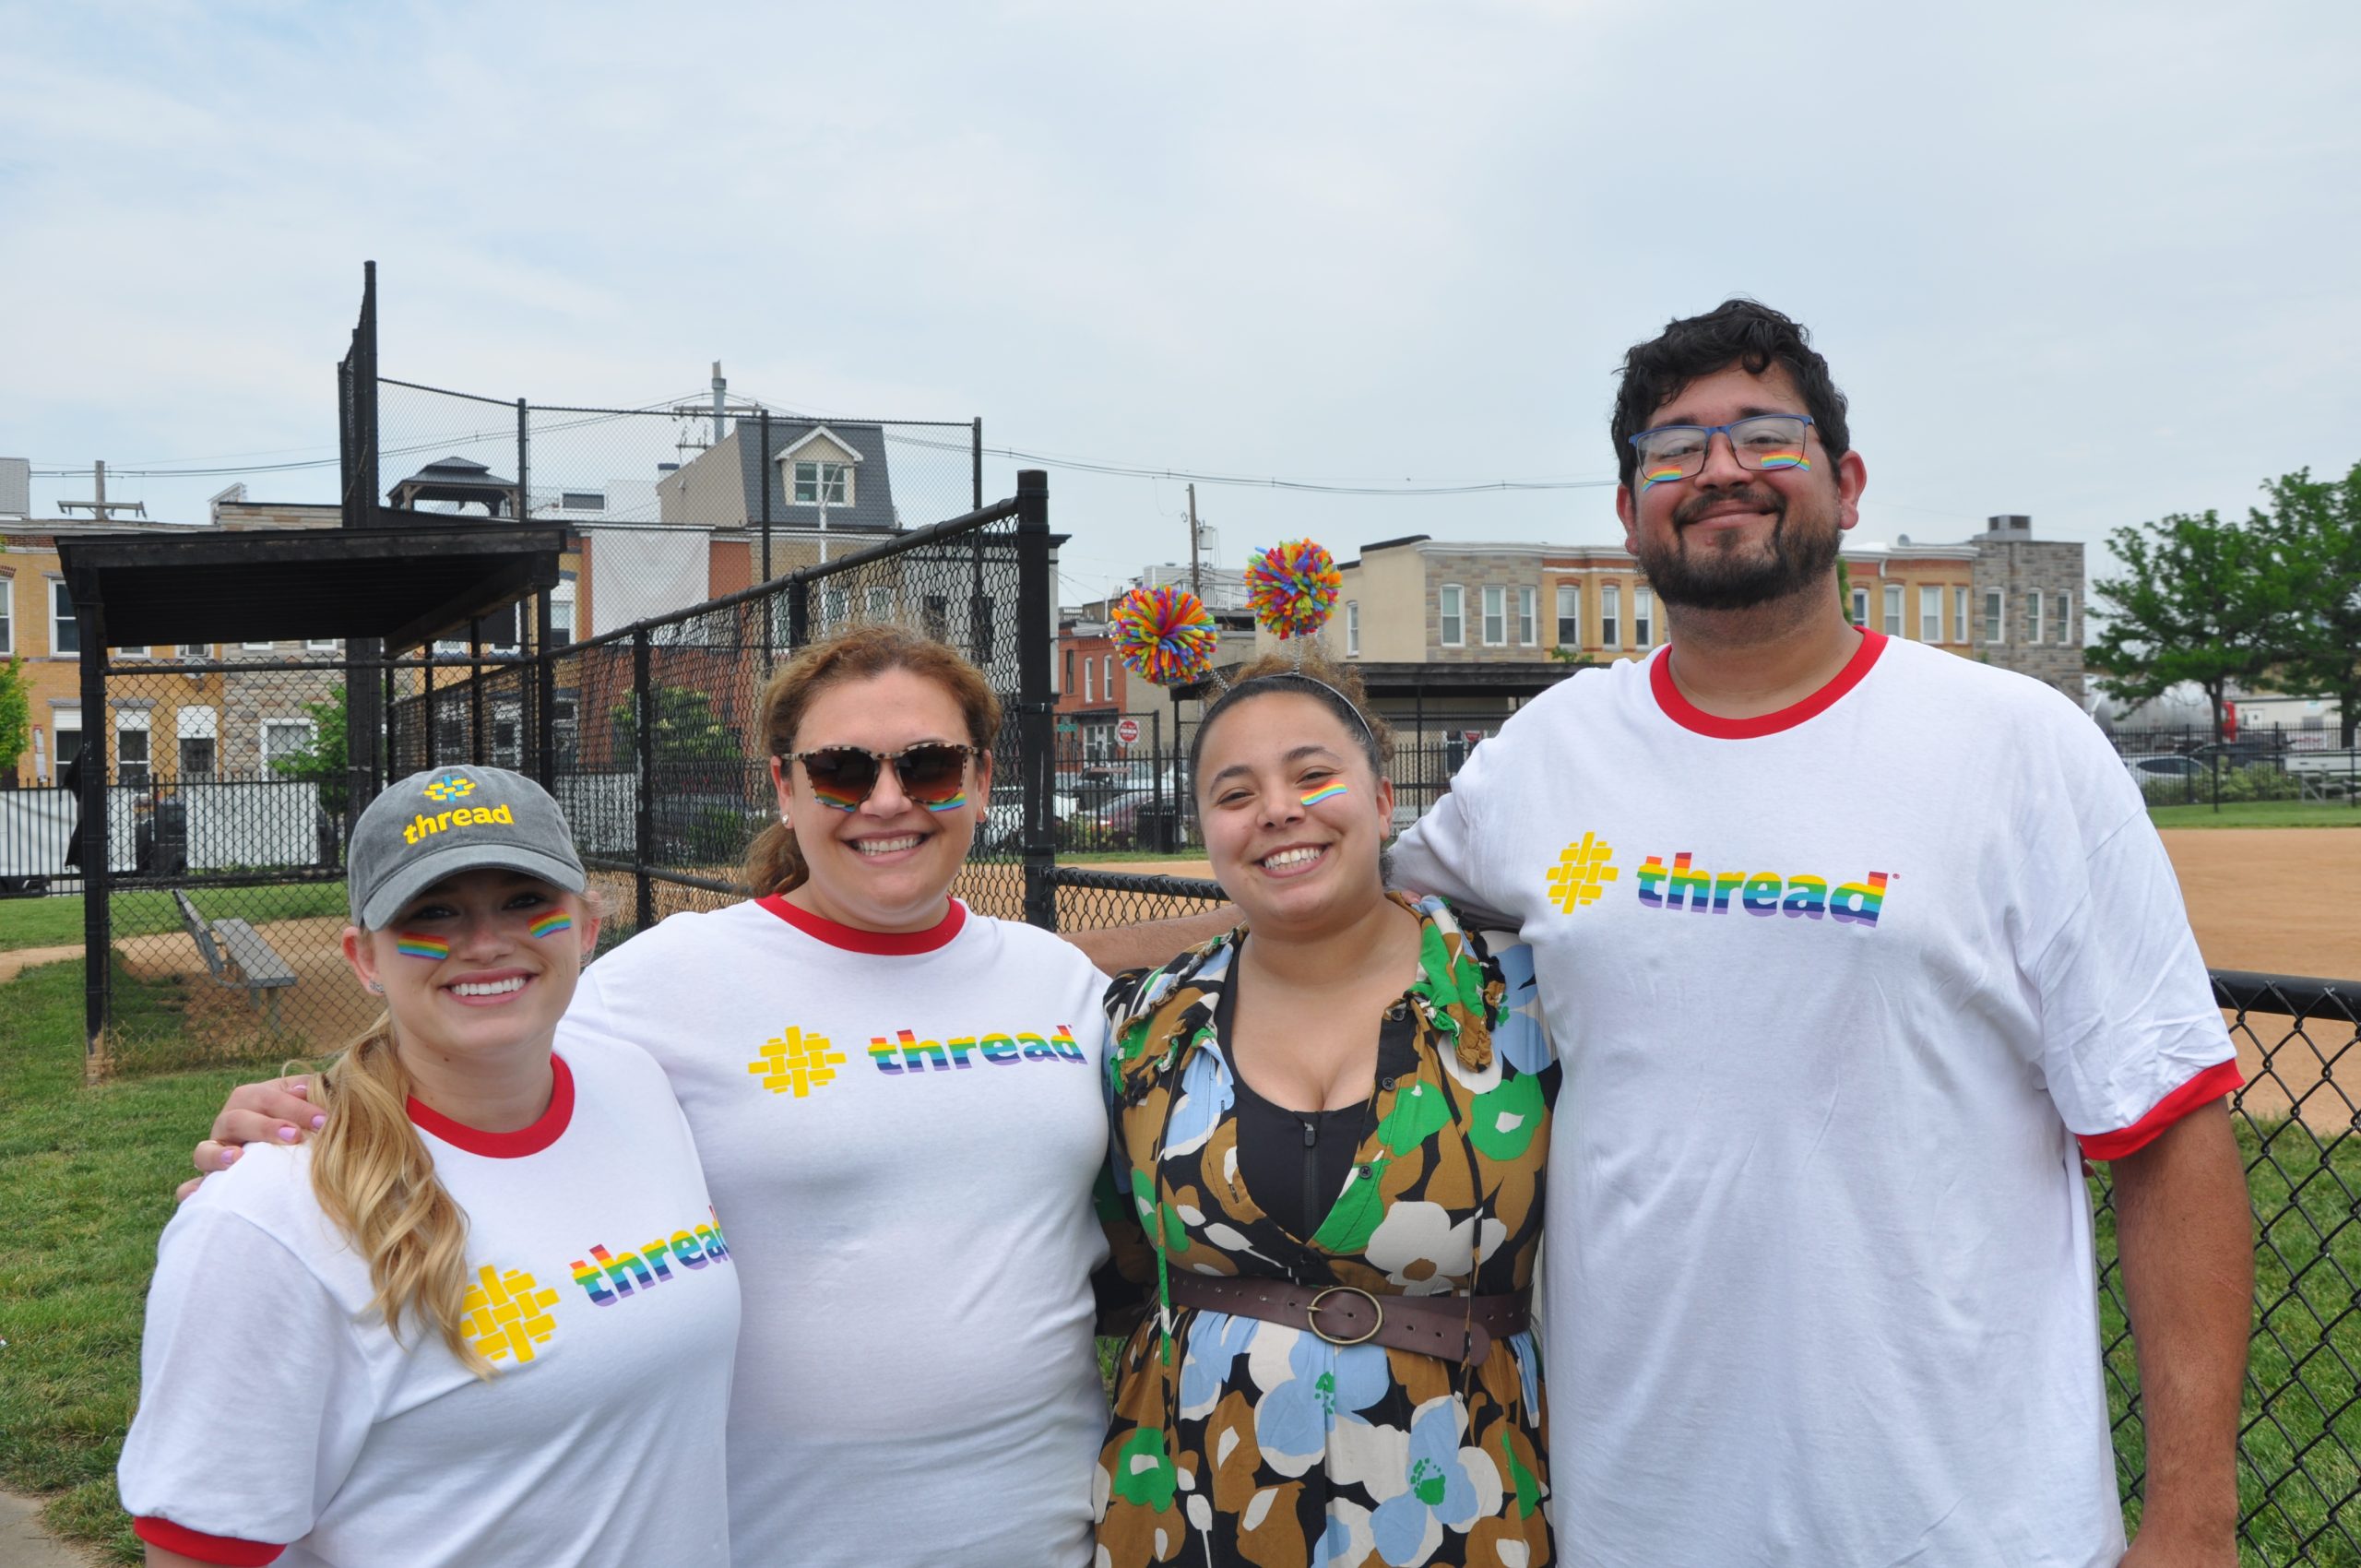 Thread staff members posing together in Thread branded pride shirts at a kickball game